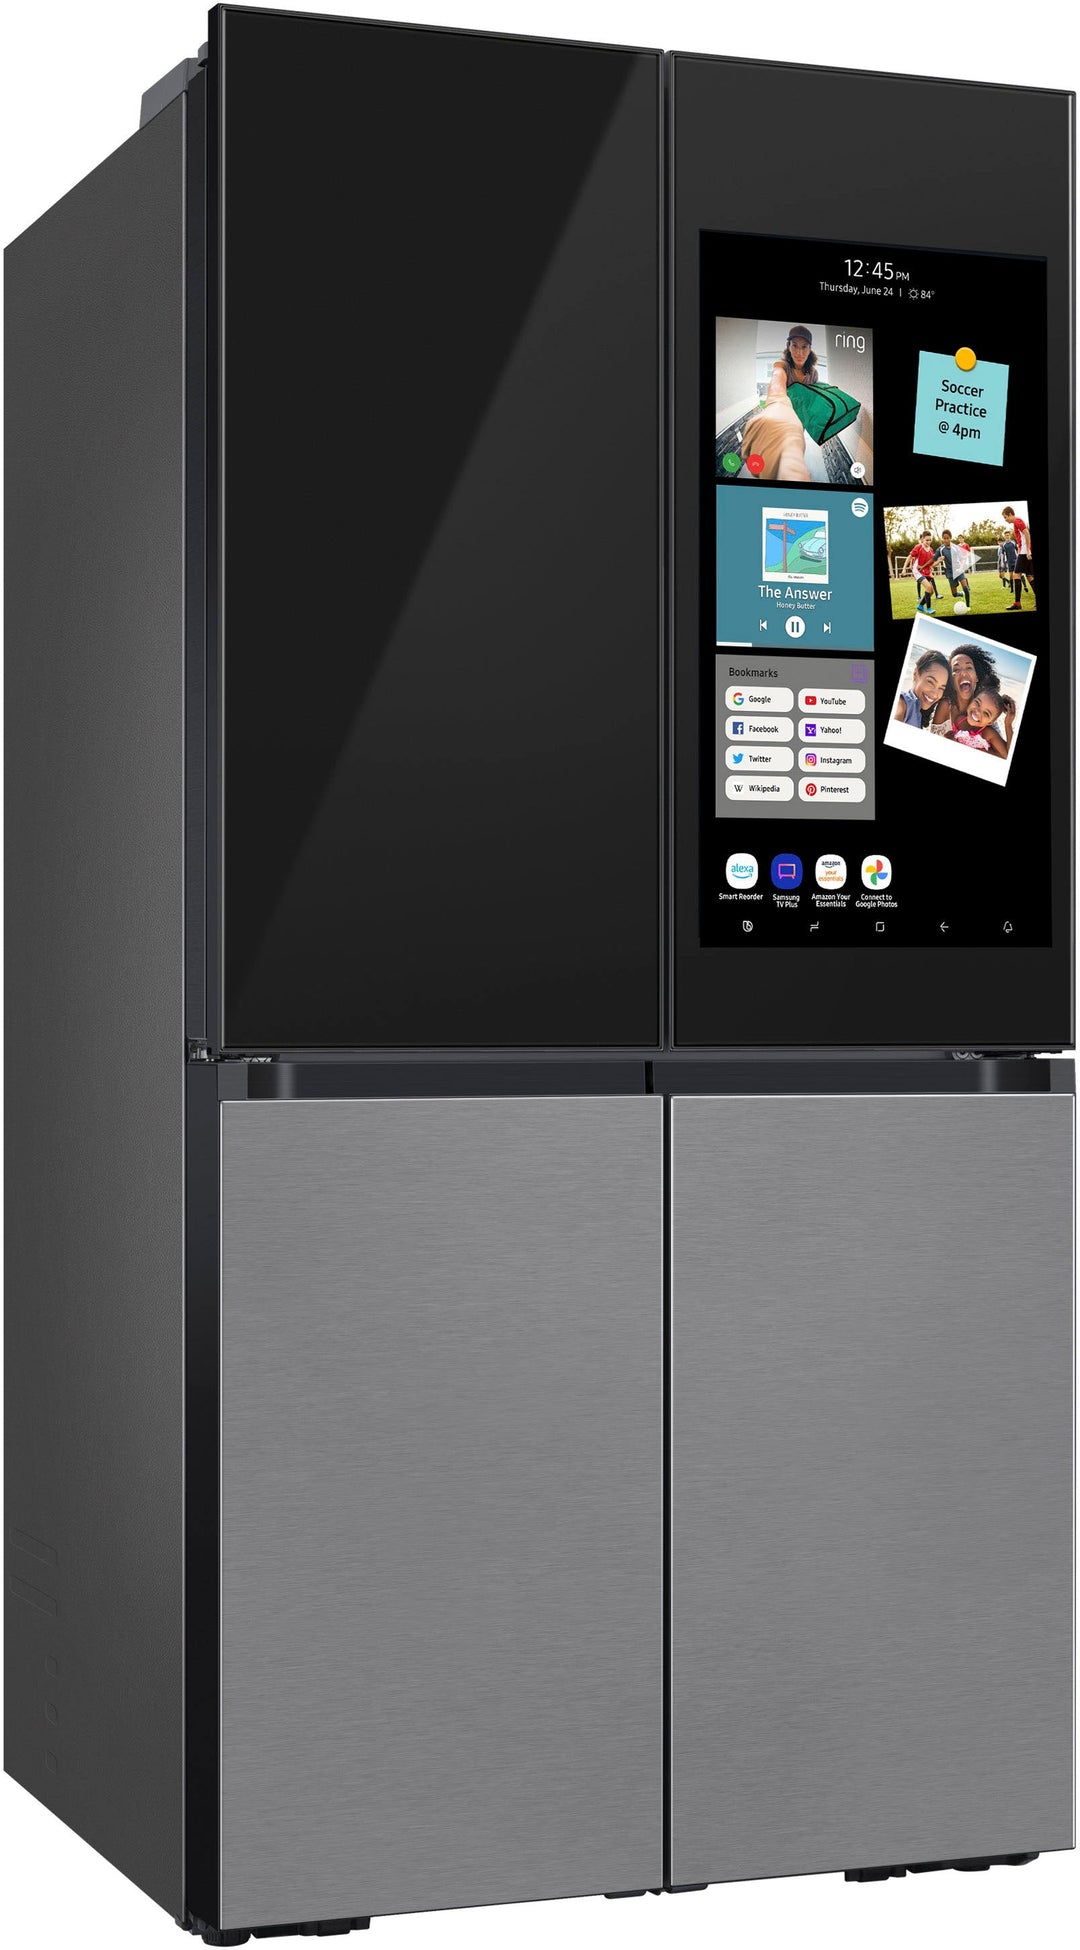 Samsung - BESPOKE 29 cu. ft. Flex French Door Smart Refrigerator with Family Hub+ - Charcoal Glass Top